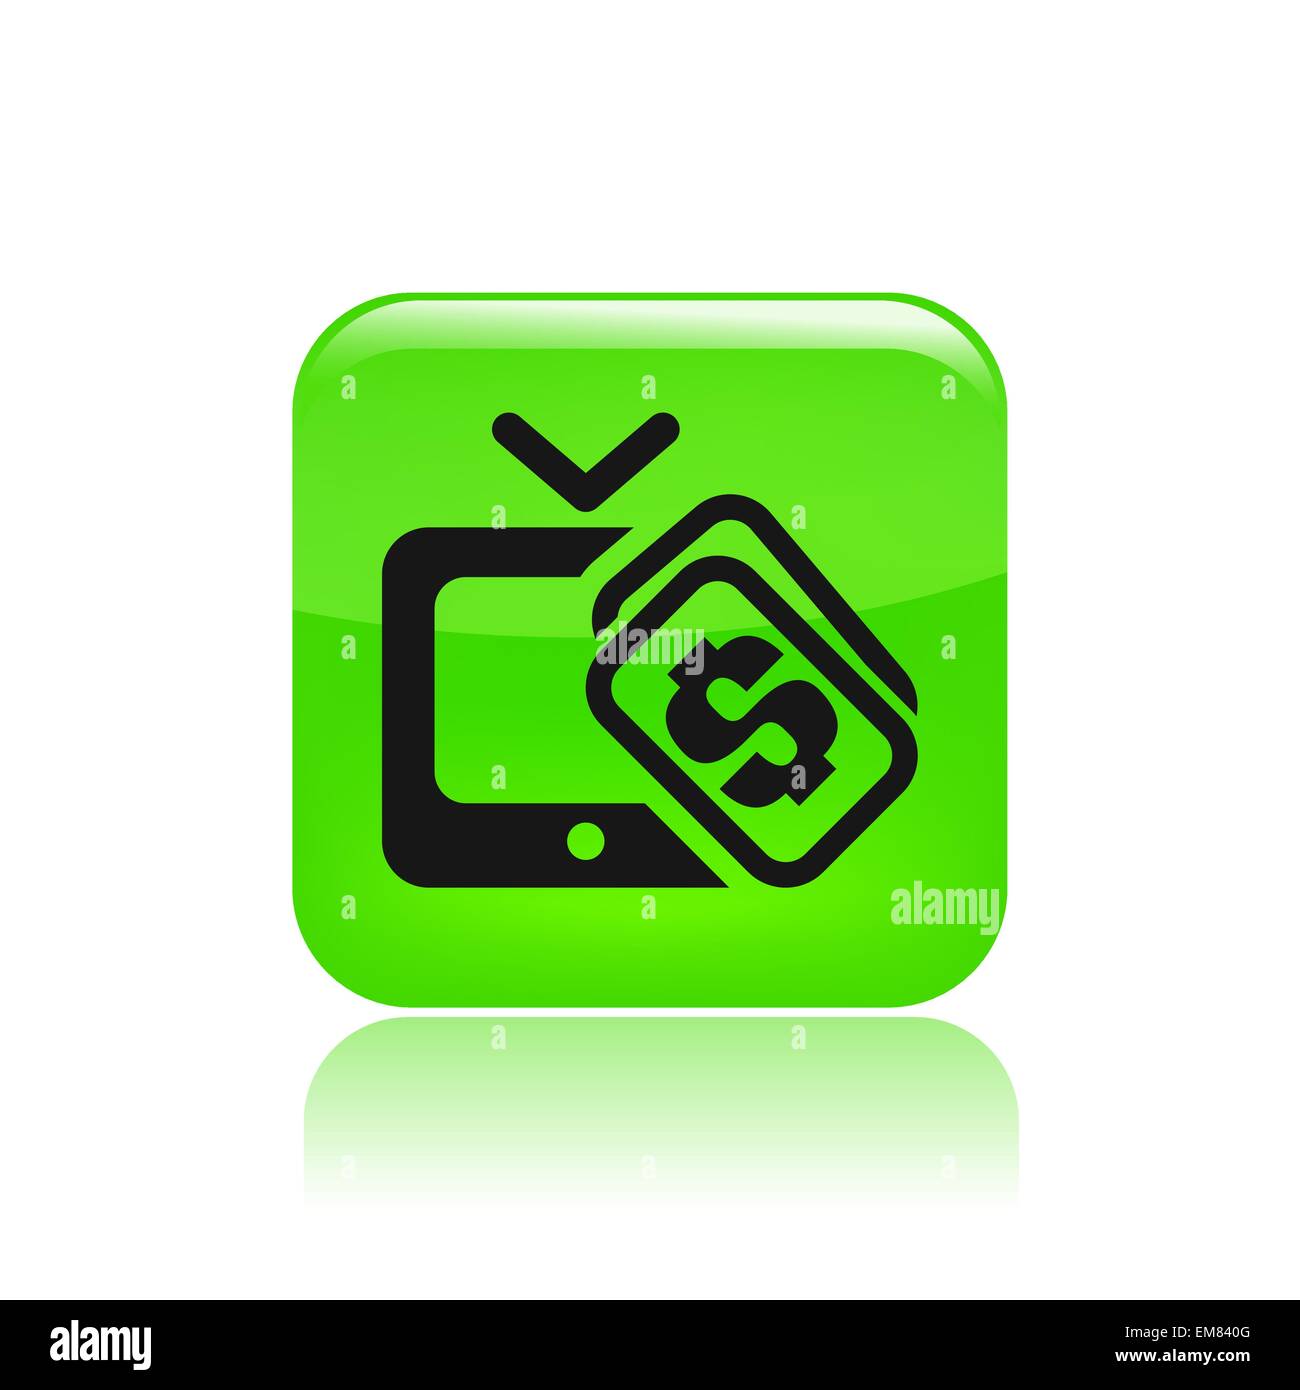 Vector illustration of single pay tv icon Stock Vector